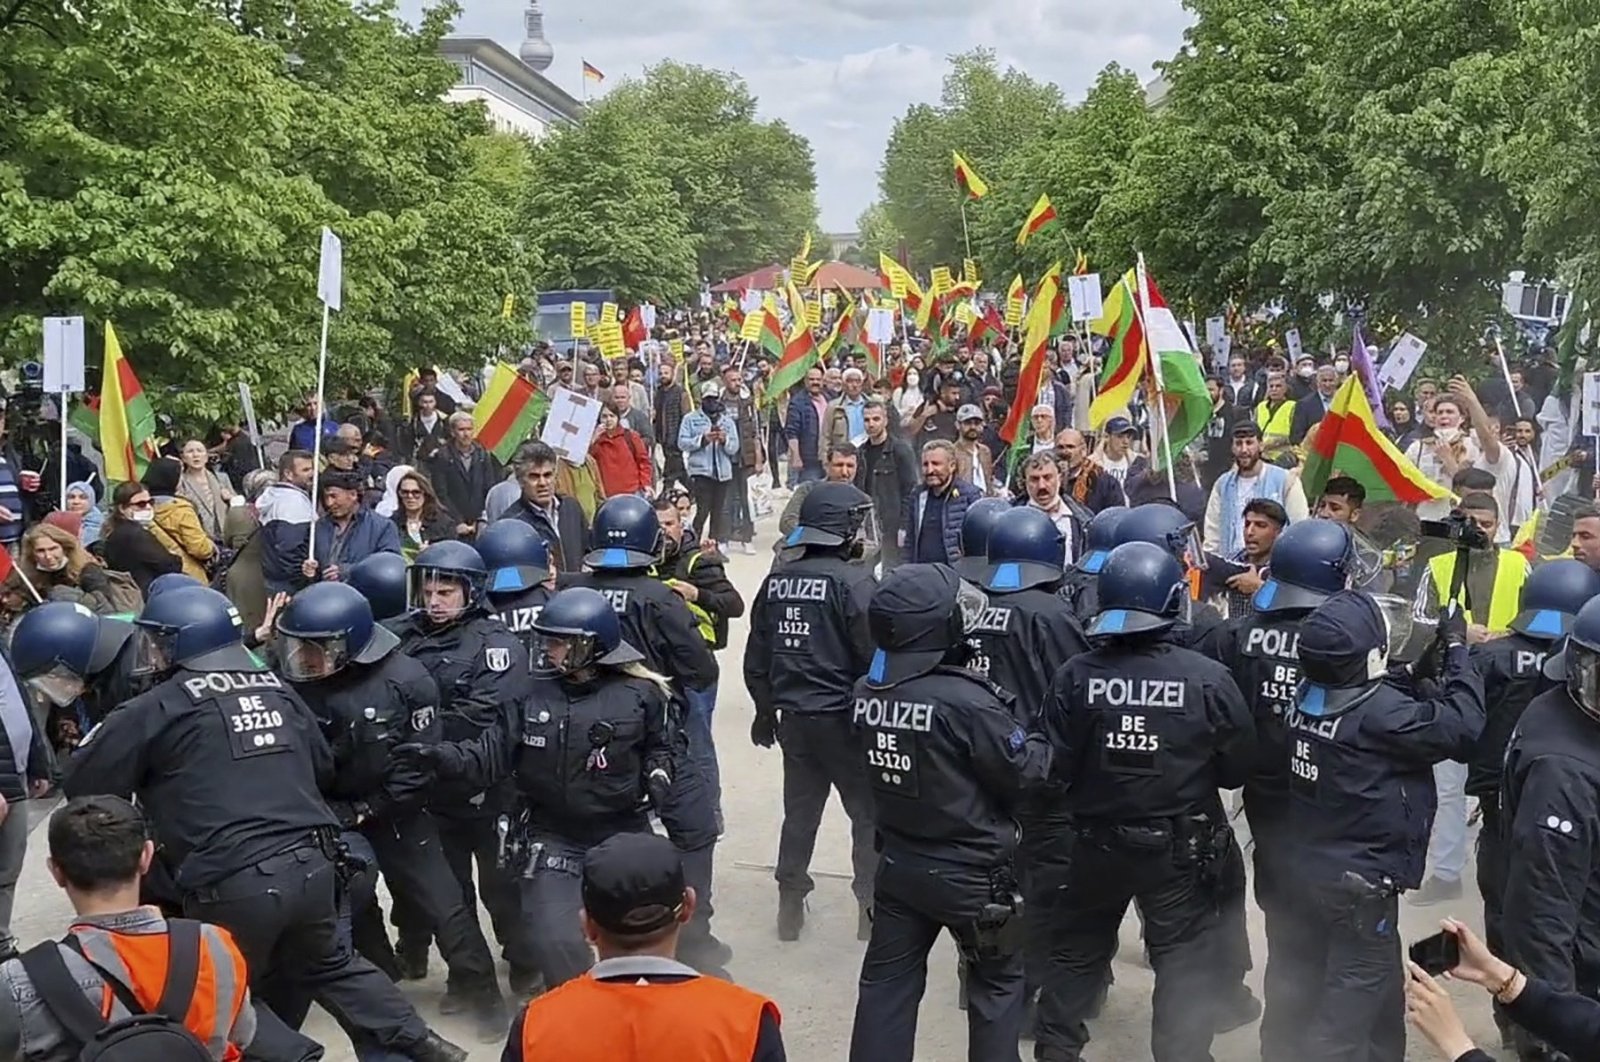 PKK supporters demonstrate against Turkish policy and briefly clash with police in Berlin, Germany, May 14, 2022. (AP Photo)